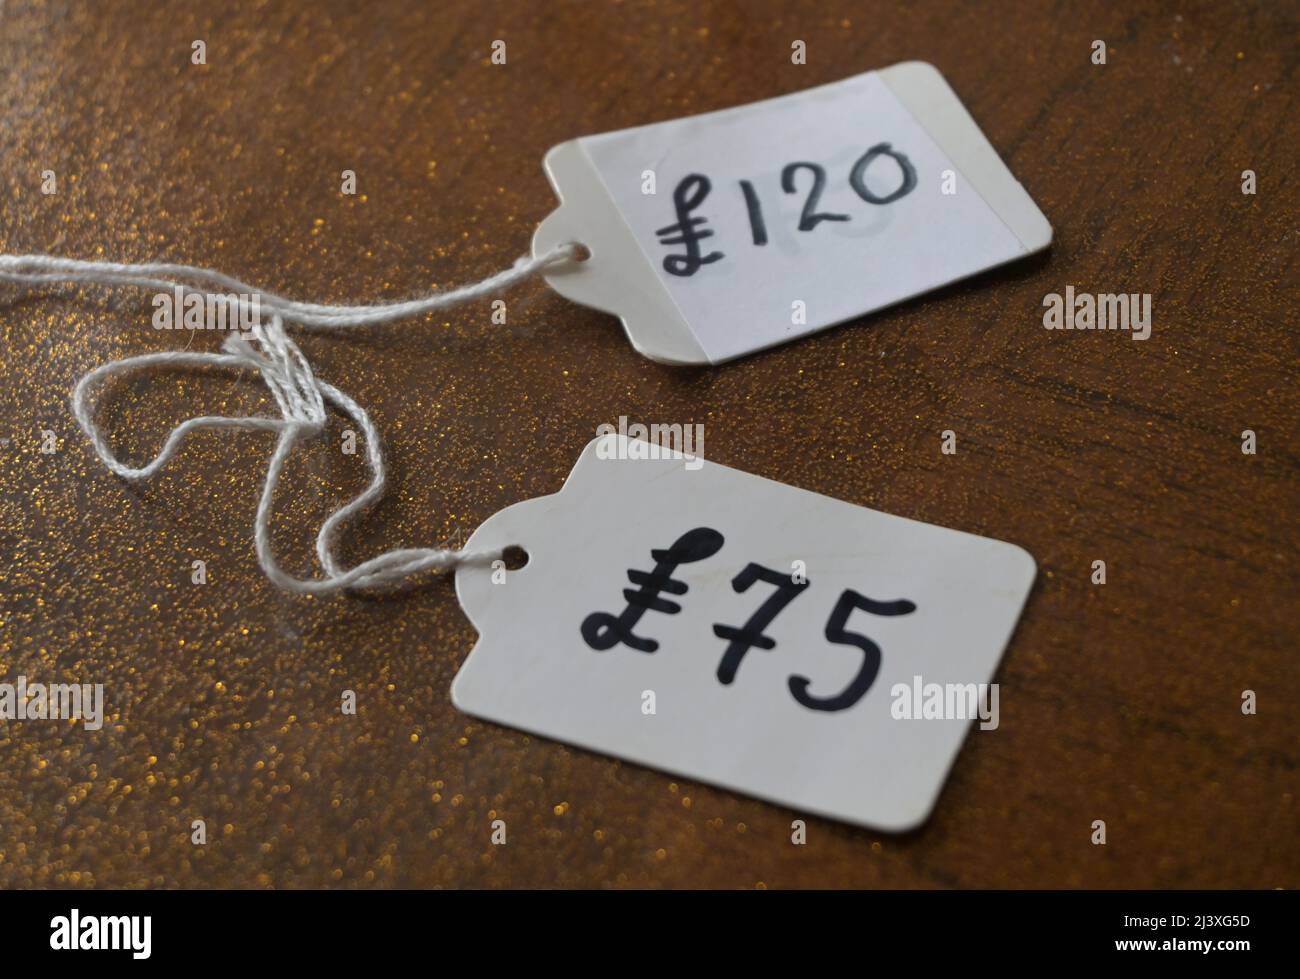 two price tags in uk pounds Stock Photo